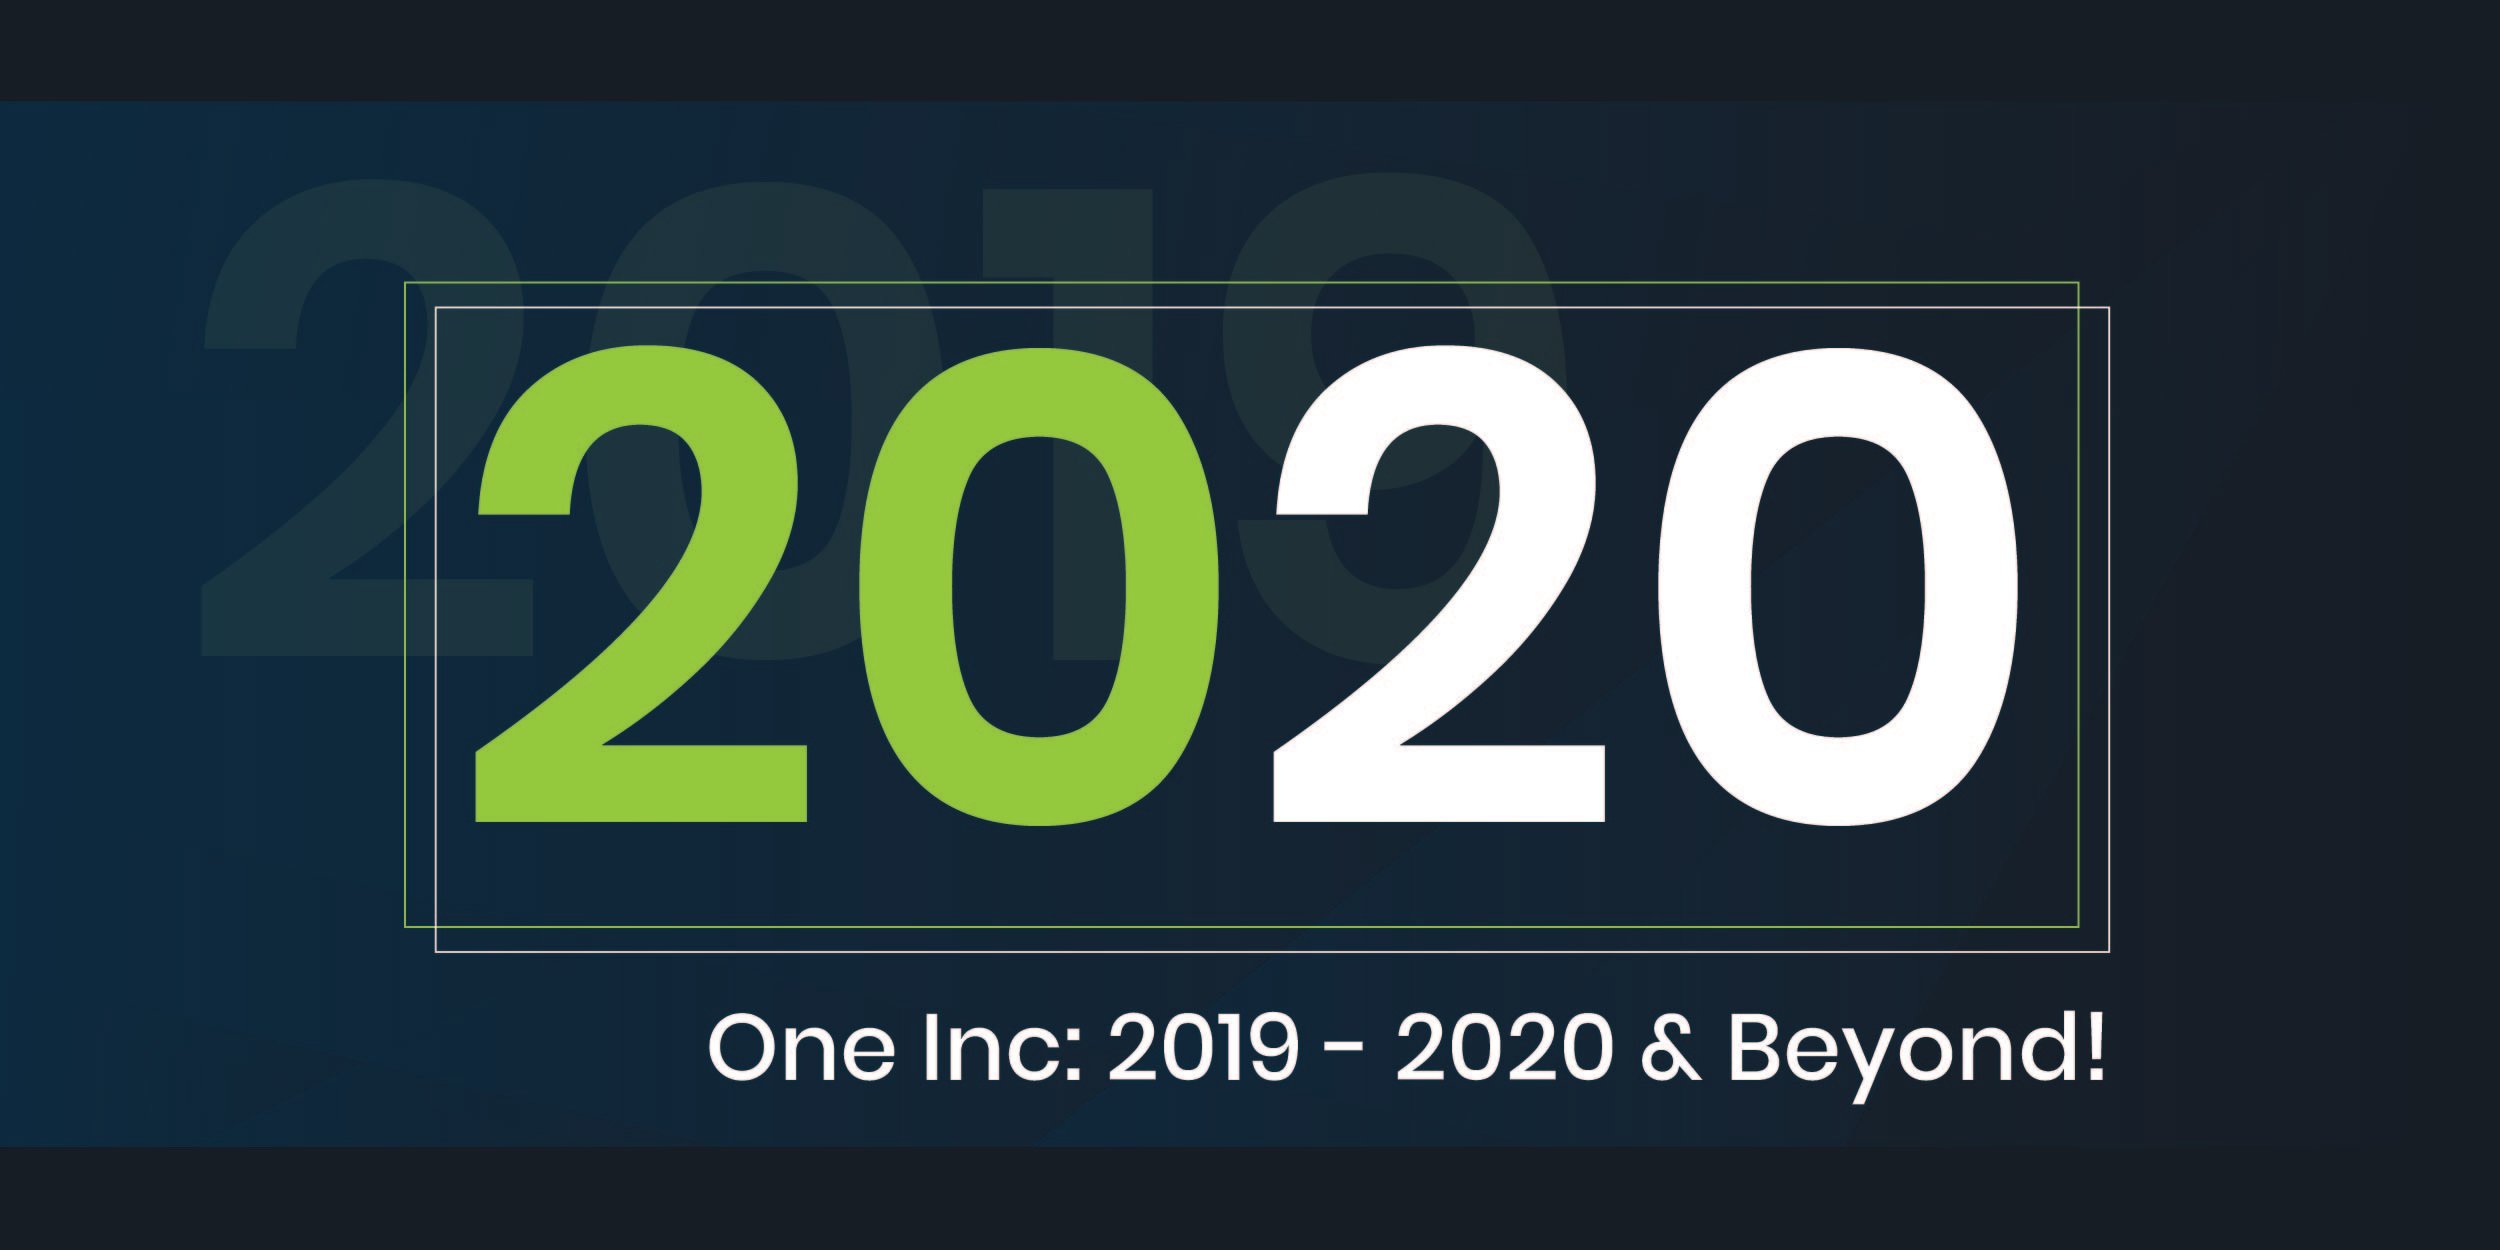 One Inc: 2019 to 2020 and Beyond! Illustration